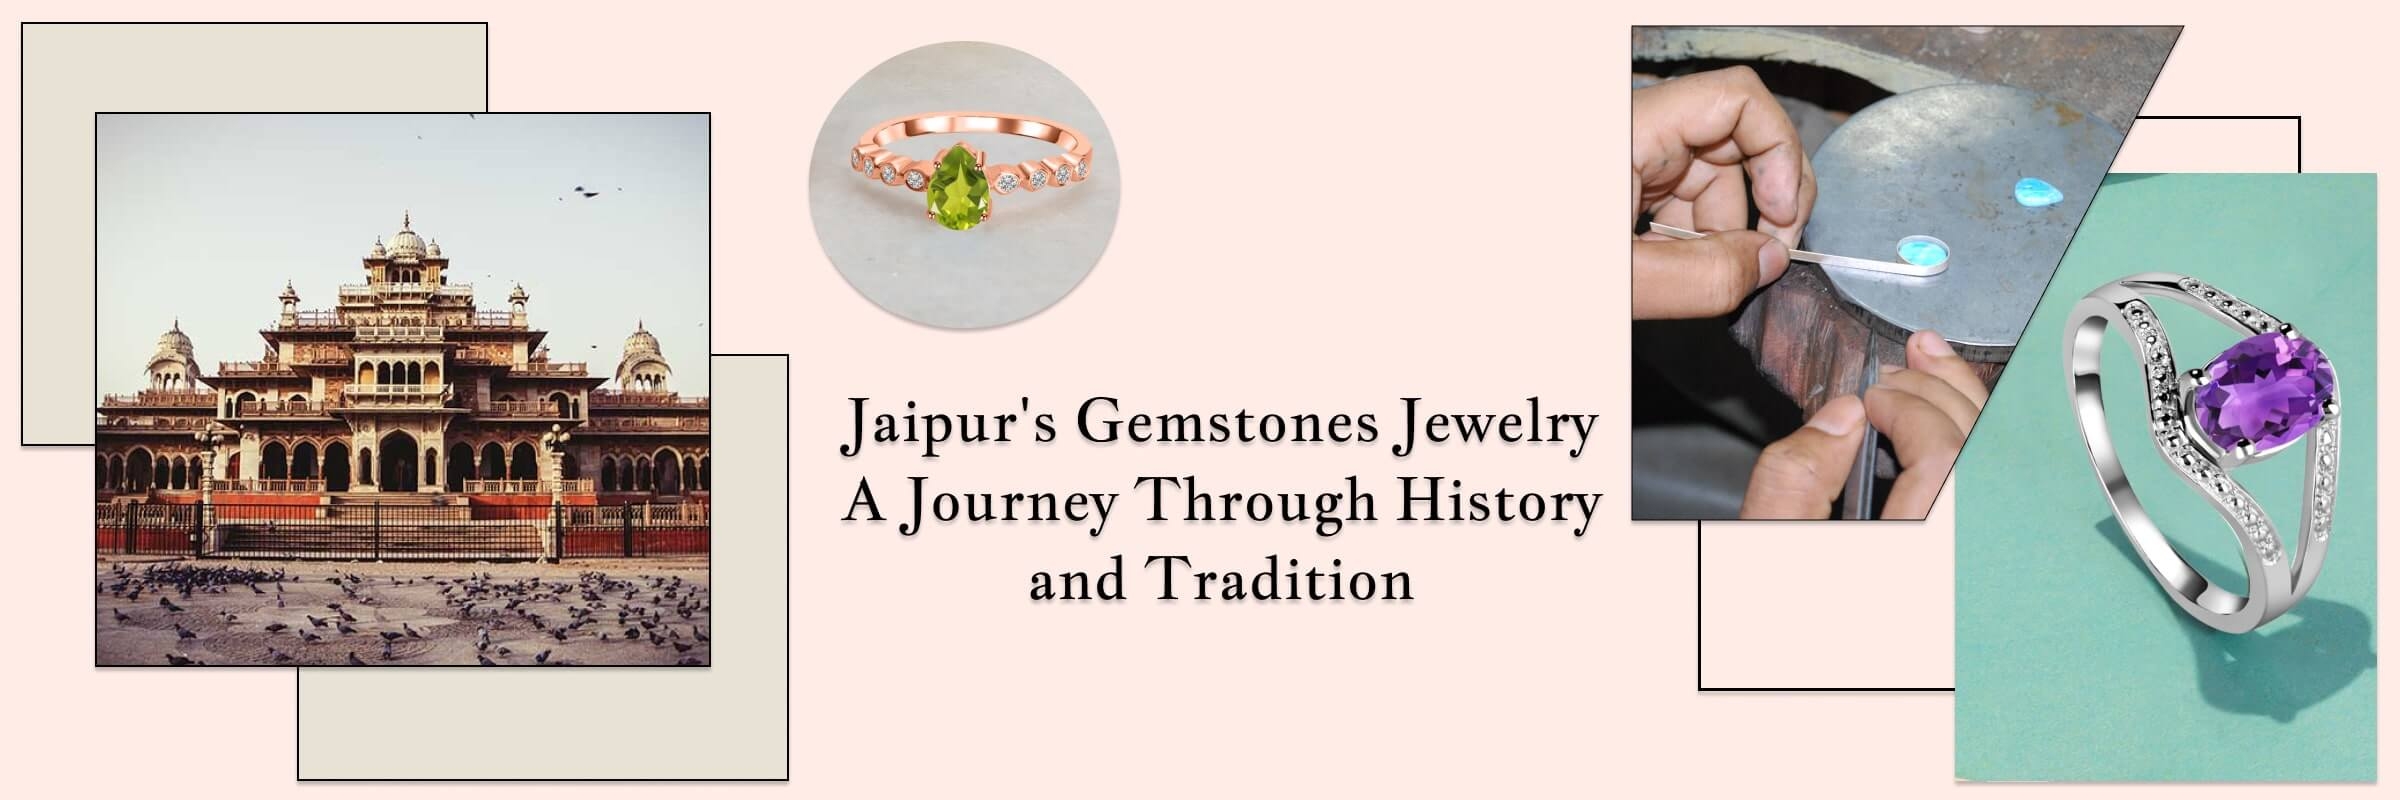 Jaipur's Gemstones Jewelry A Journey Through History and Tradition